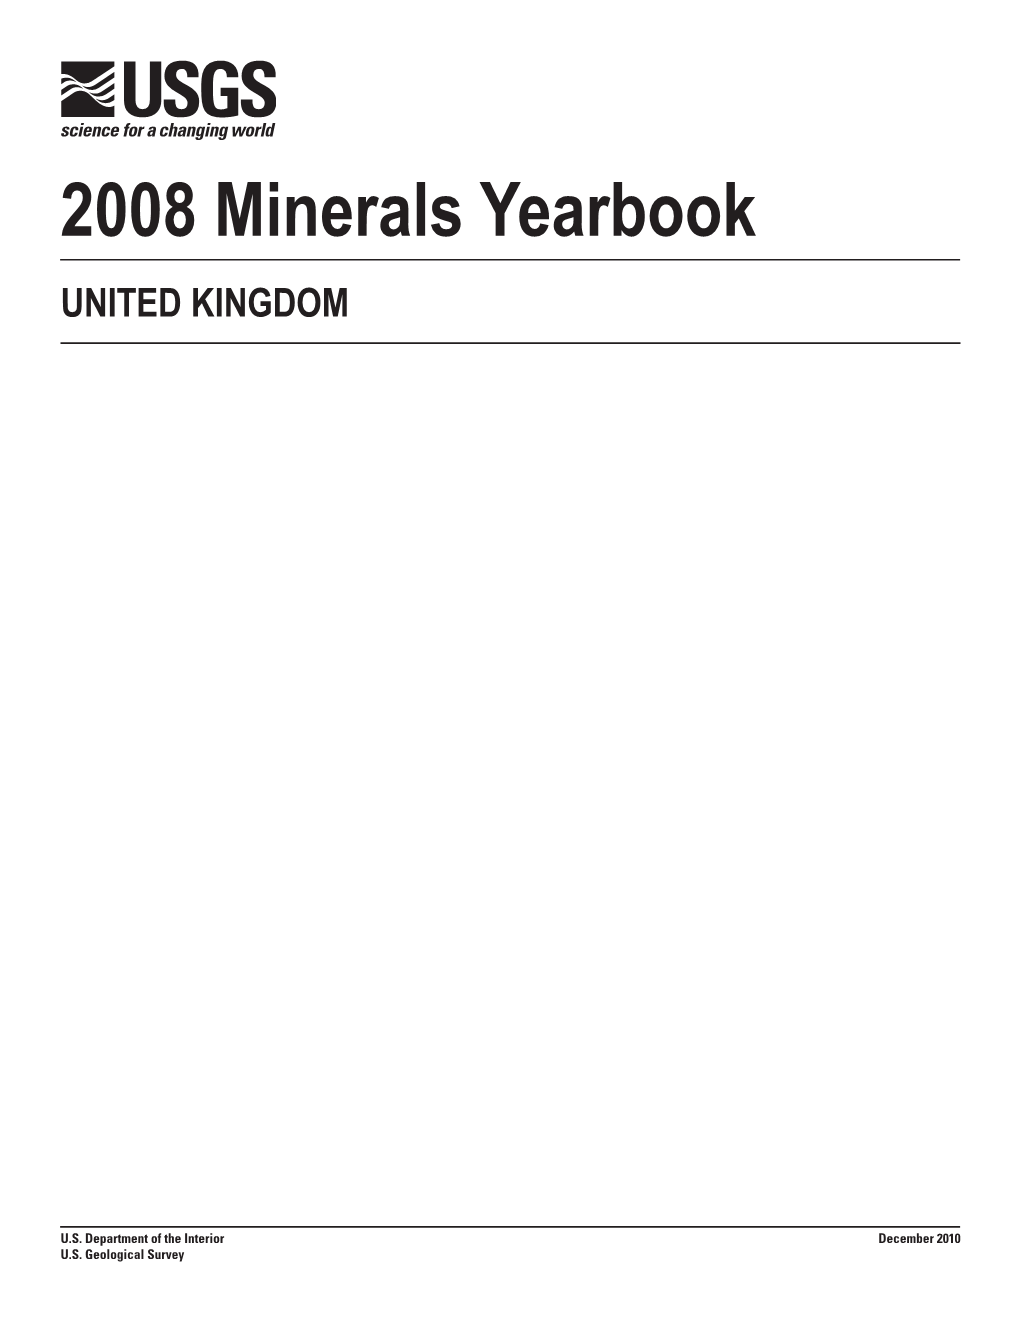 The Mineral Industry of the United Kingdom in 2008